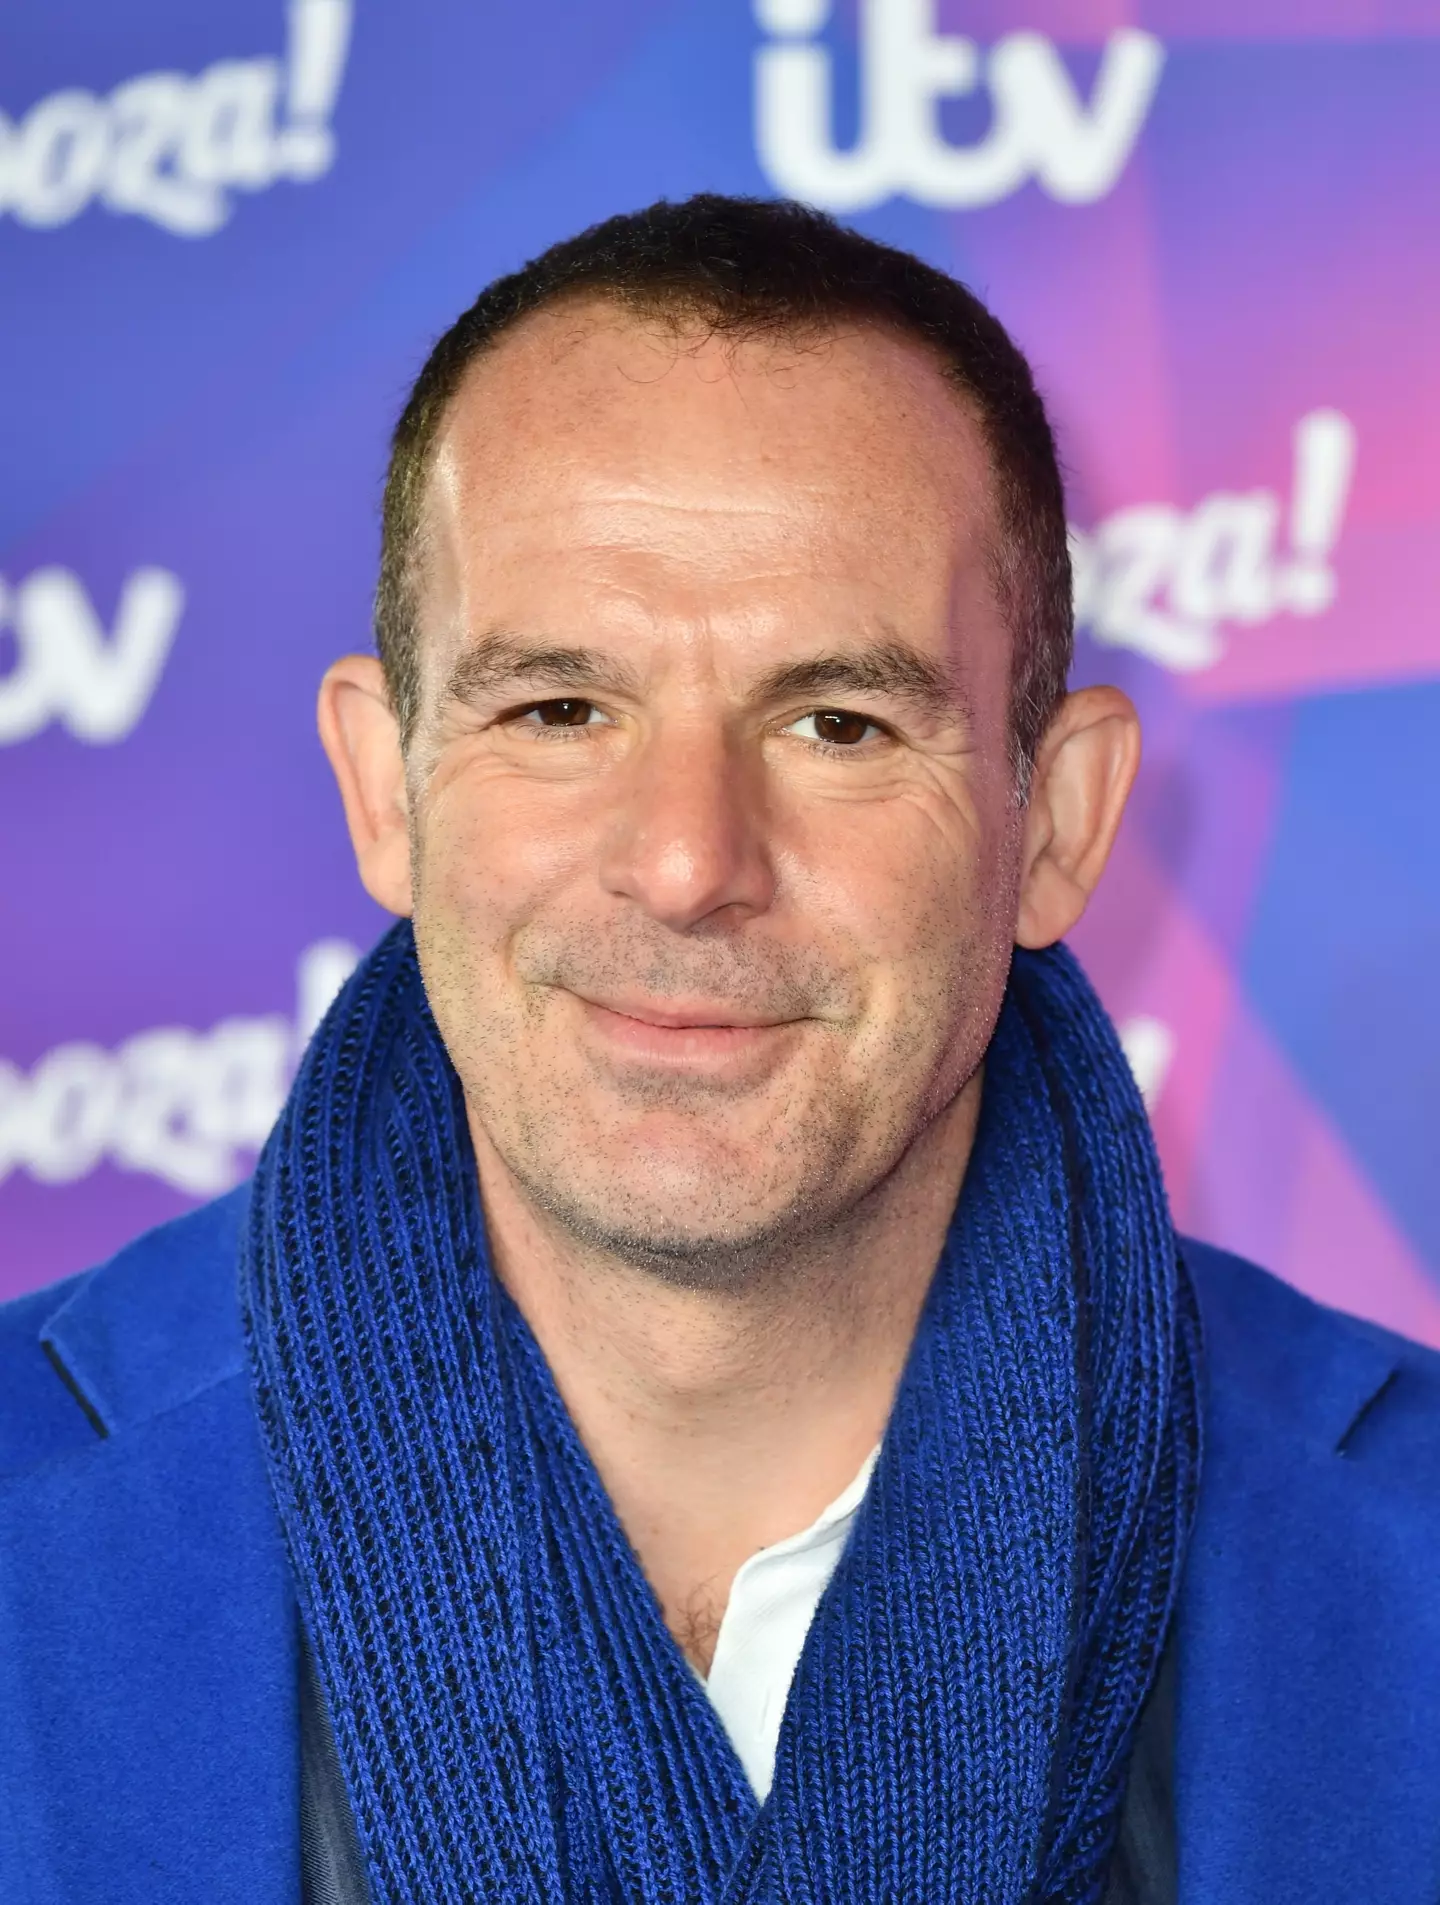 Martin Lewis is warning people about scam ads that could cost you thousands.